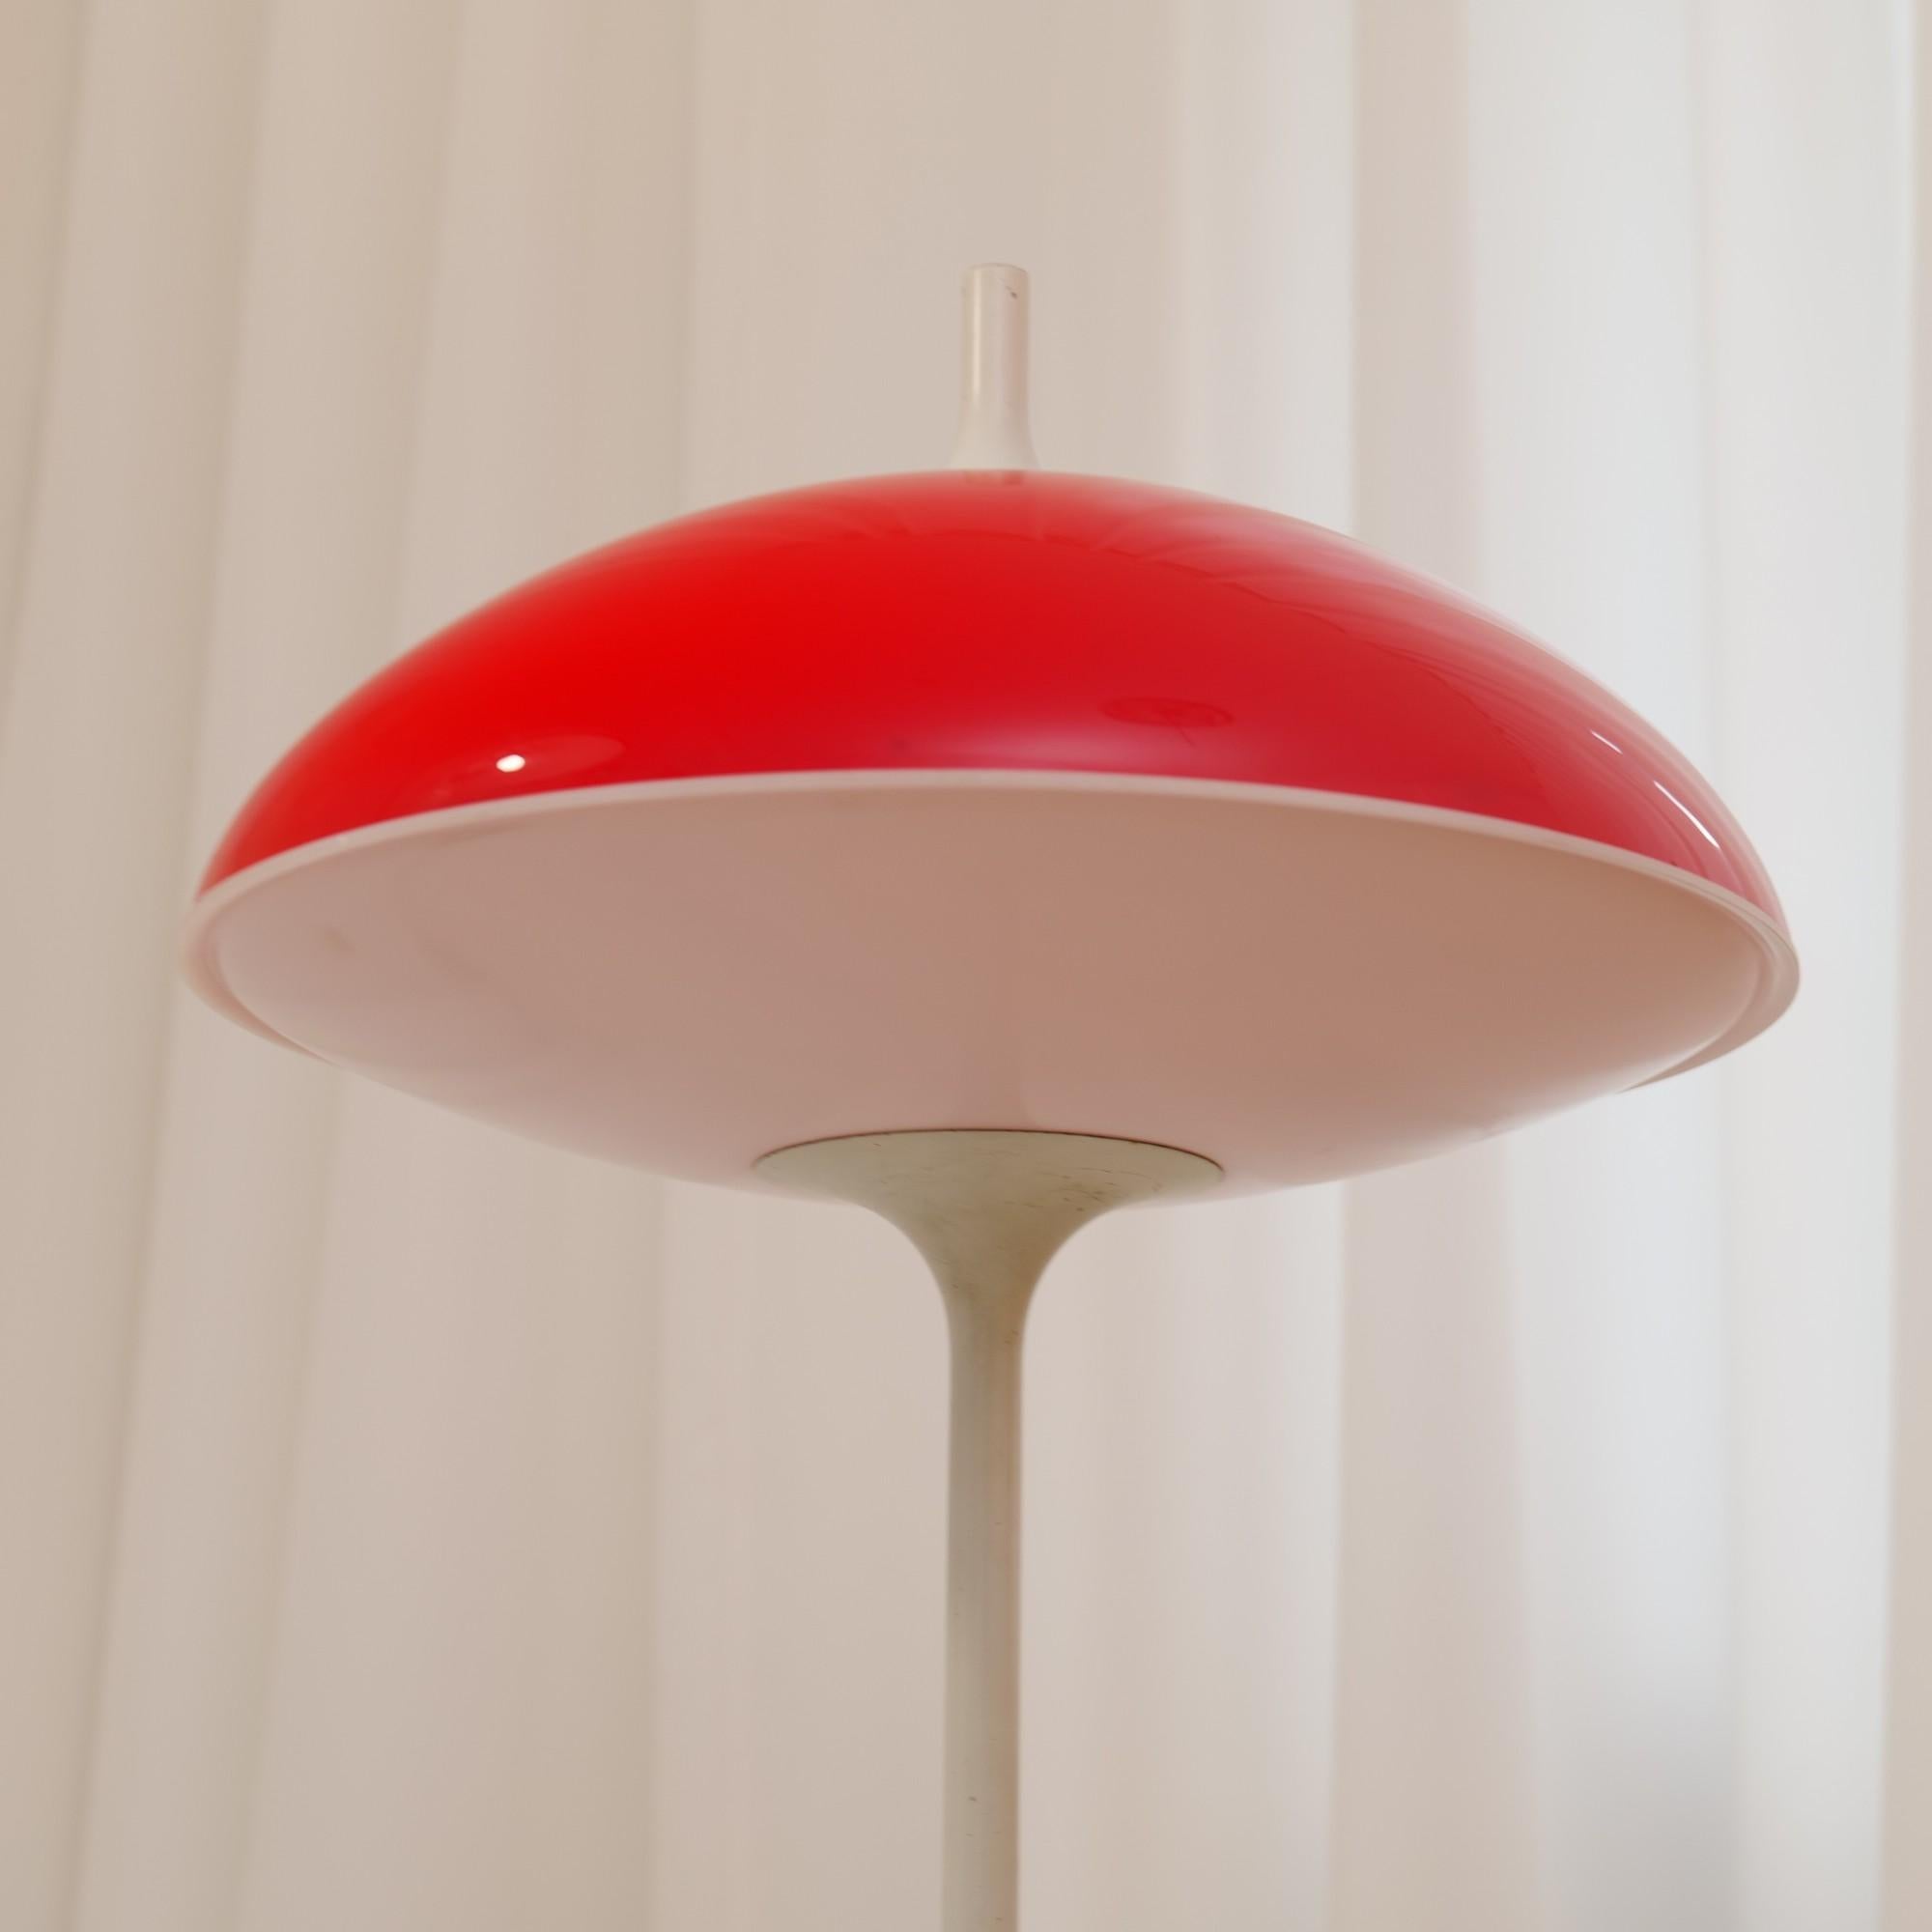 Space Age space age mushroom lamp by Temde - 1970s For Sale